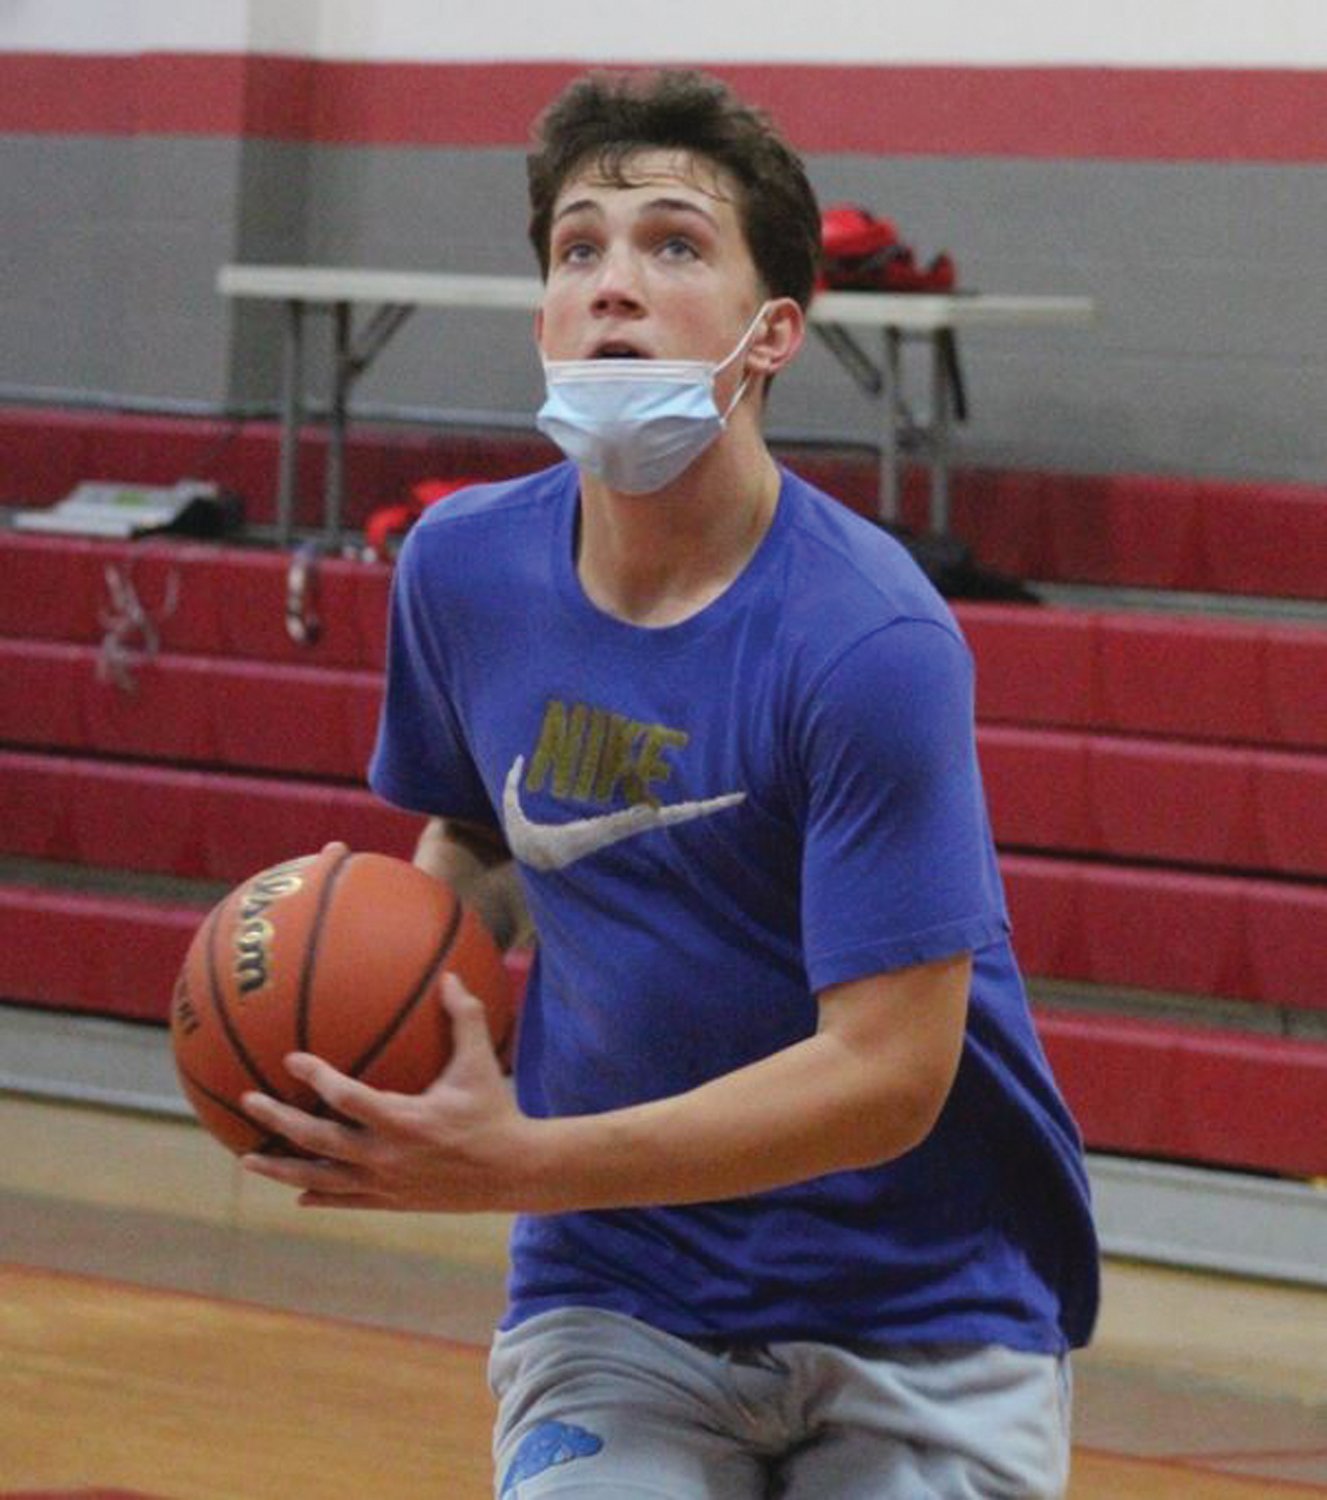 IN THE PAINT: Cranston West senior Joe Domenico drives to the basket during a recent
practice. (Photos by Alex Sponseller)